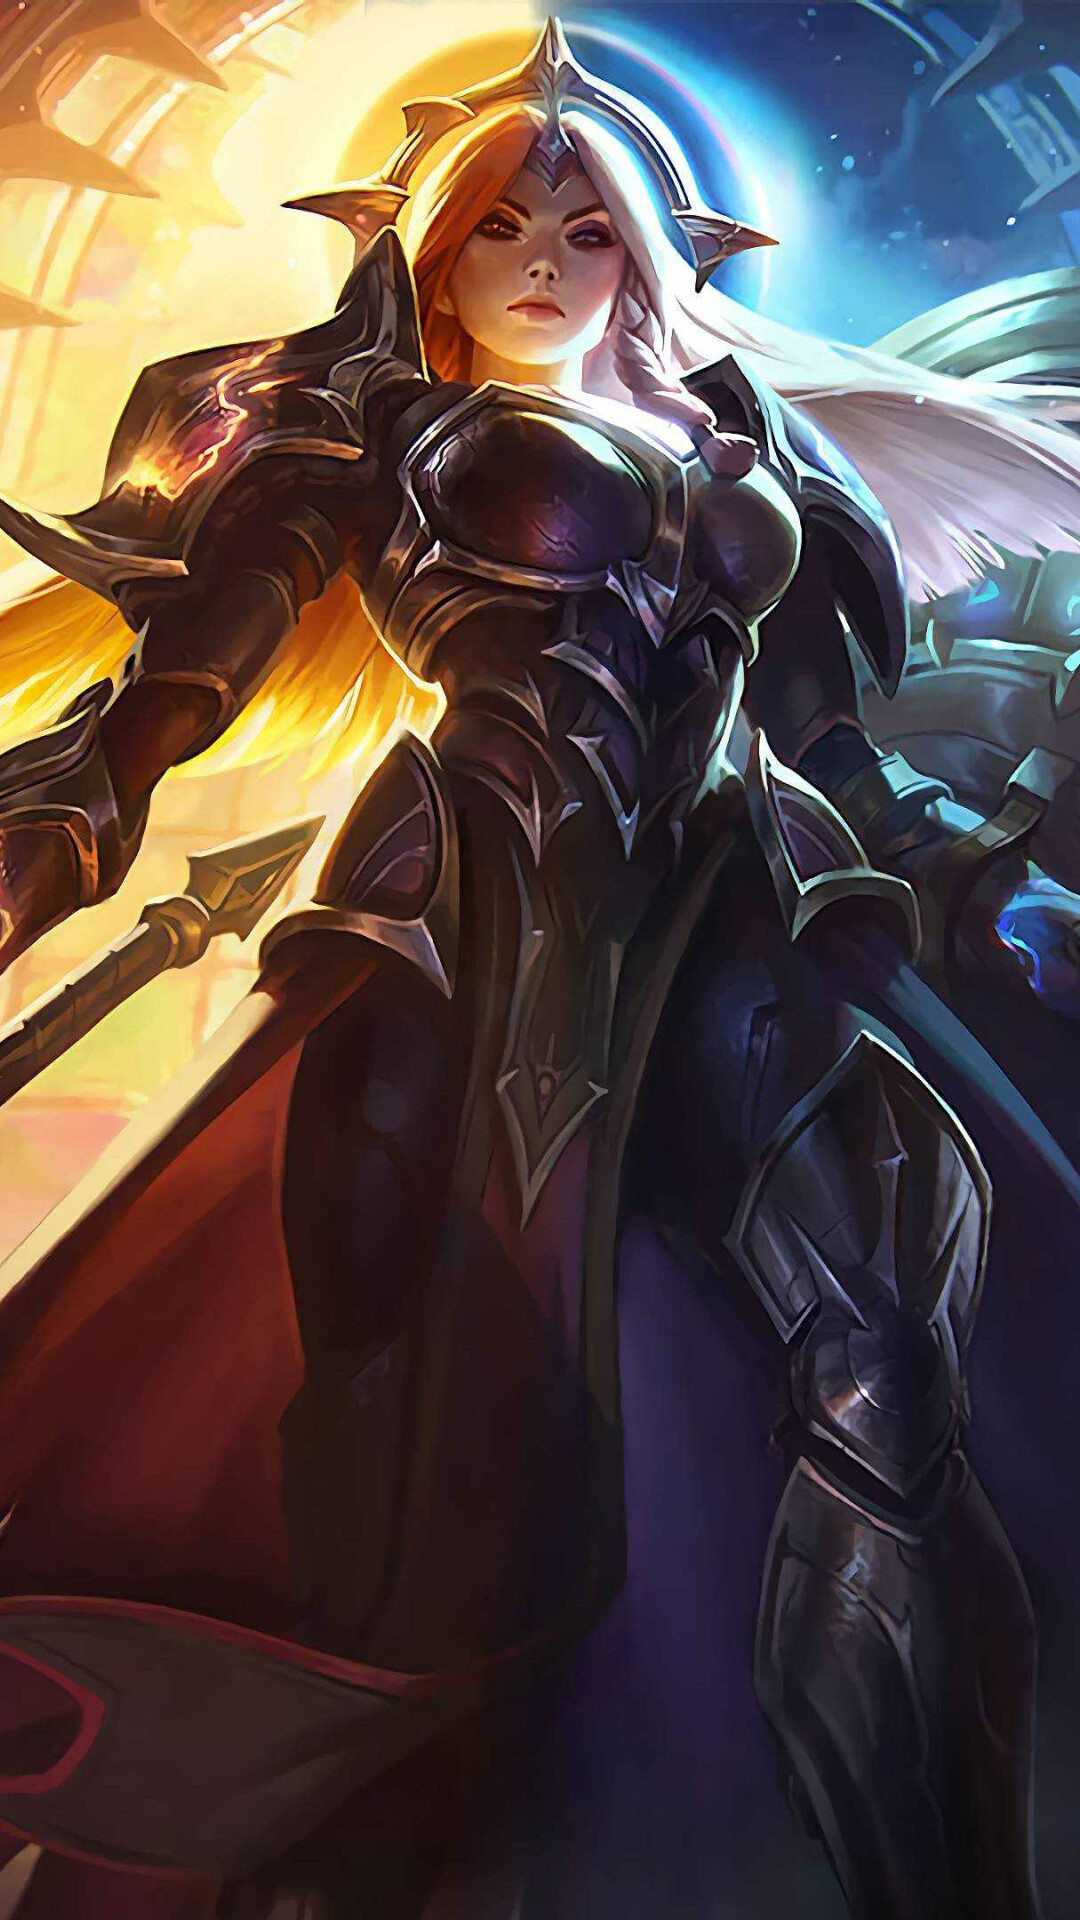 League of Legends: Leona, A holy warrior of the Solari, Zenith Blade. 1080x1920 Full HD Wallpaper.